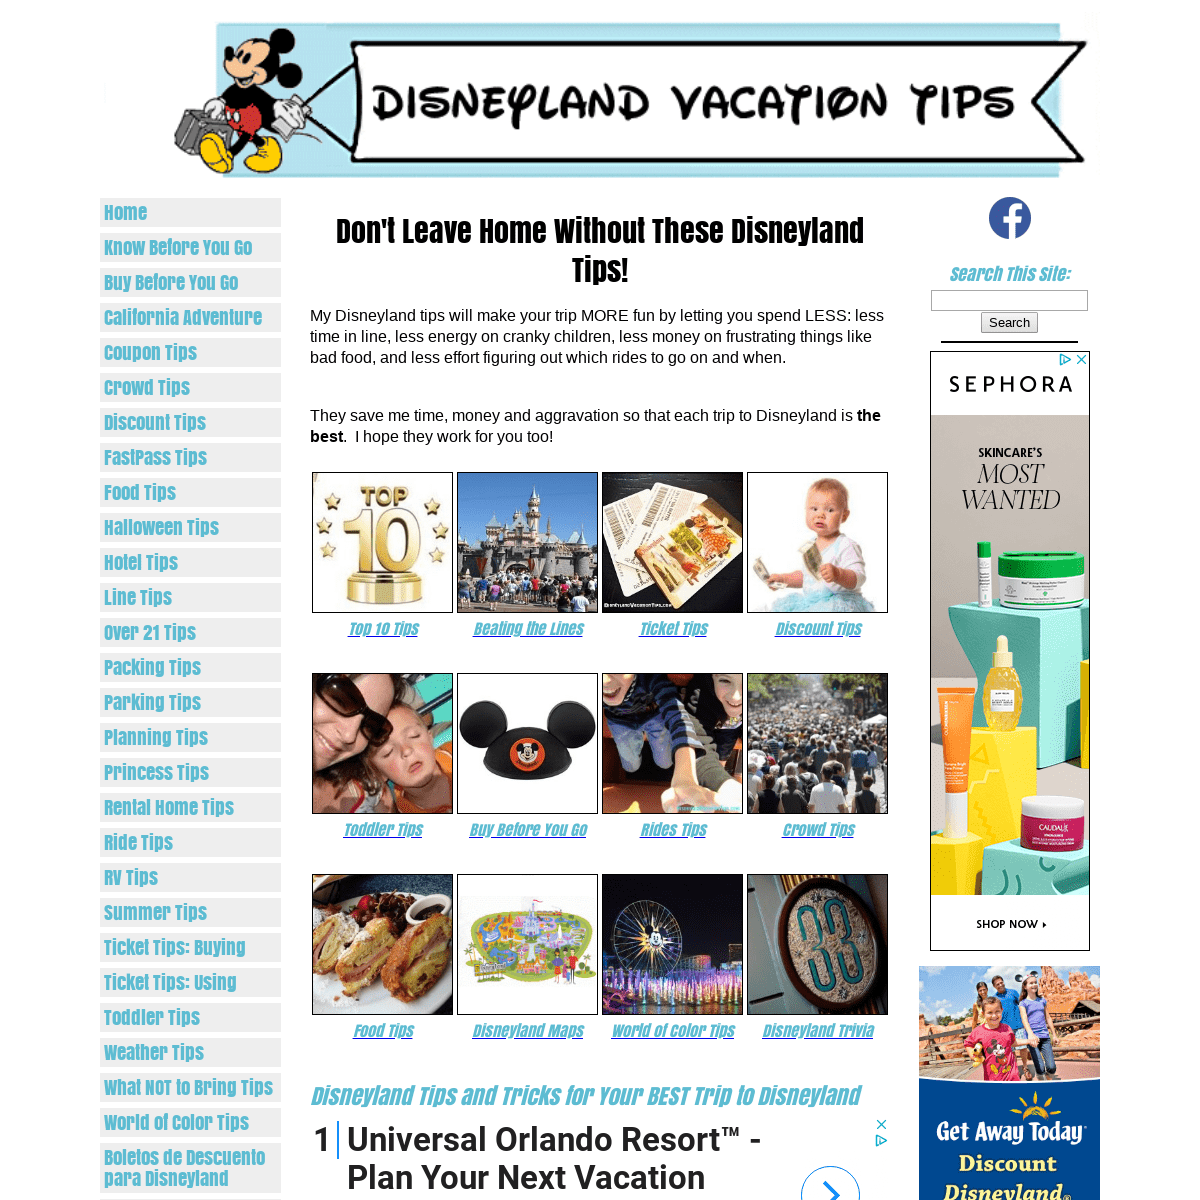 Disneyland Tips - Things you should know before your vacation to Disneyland!